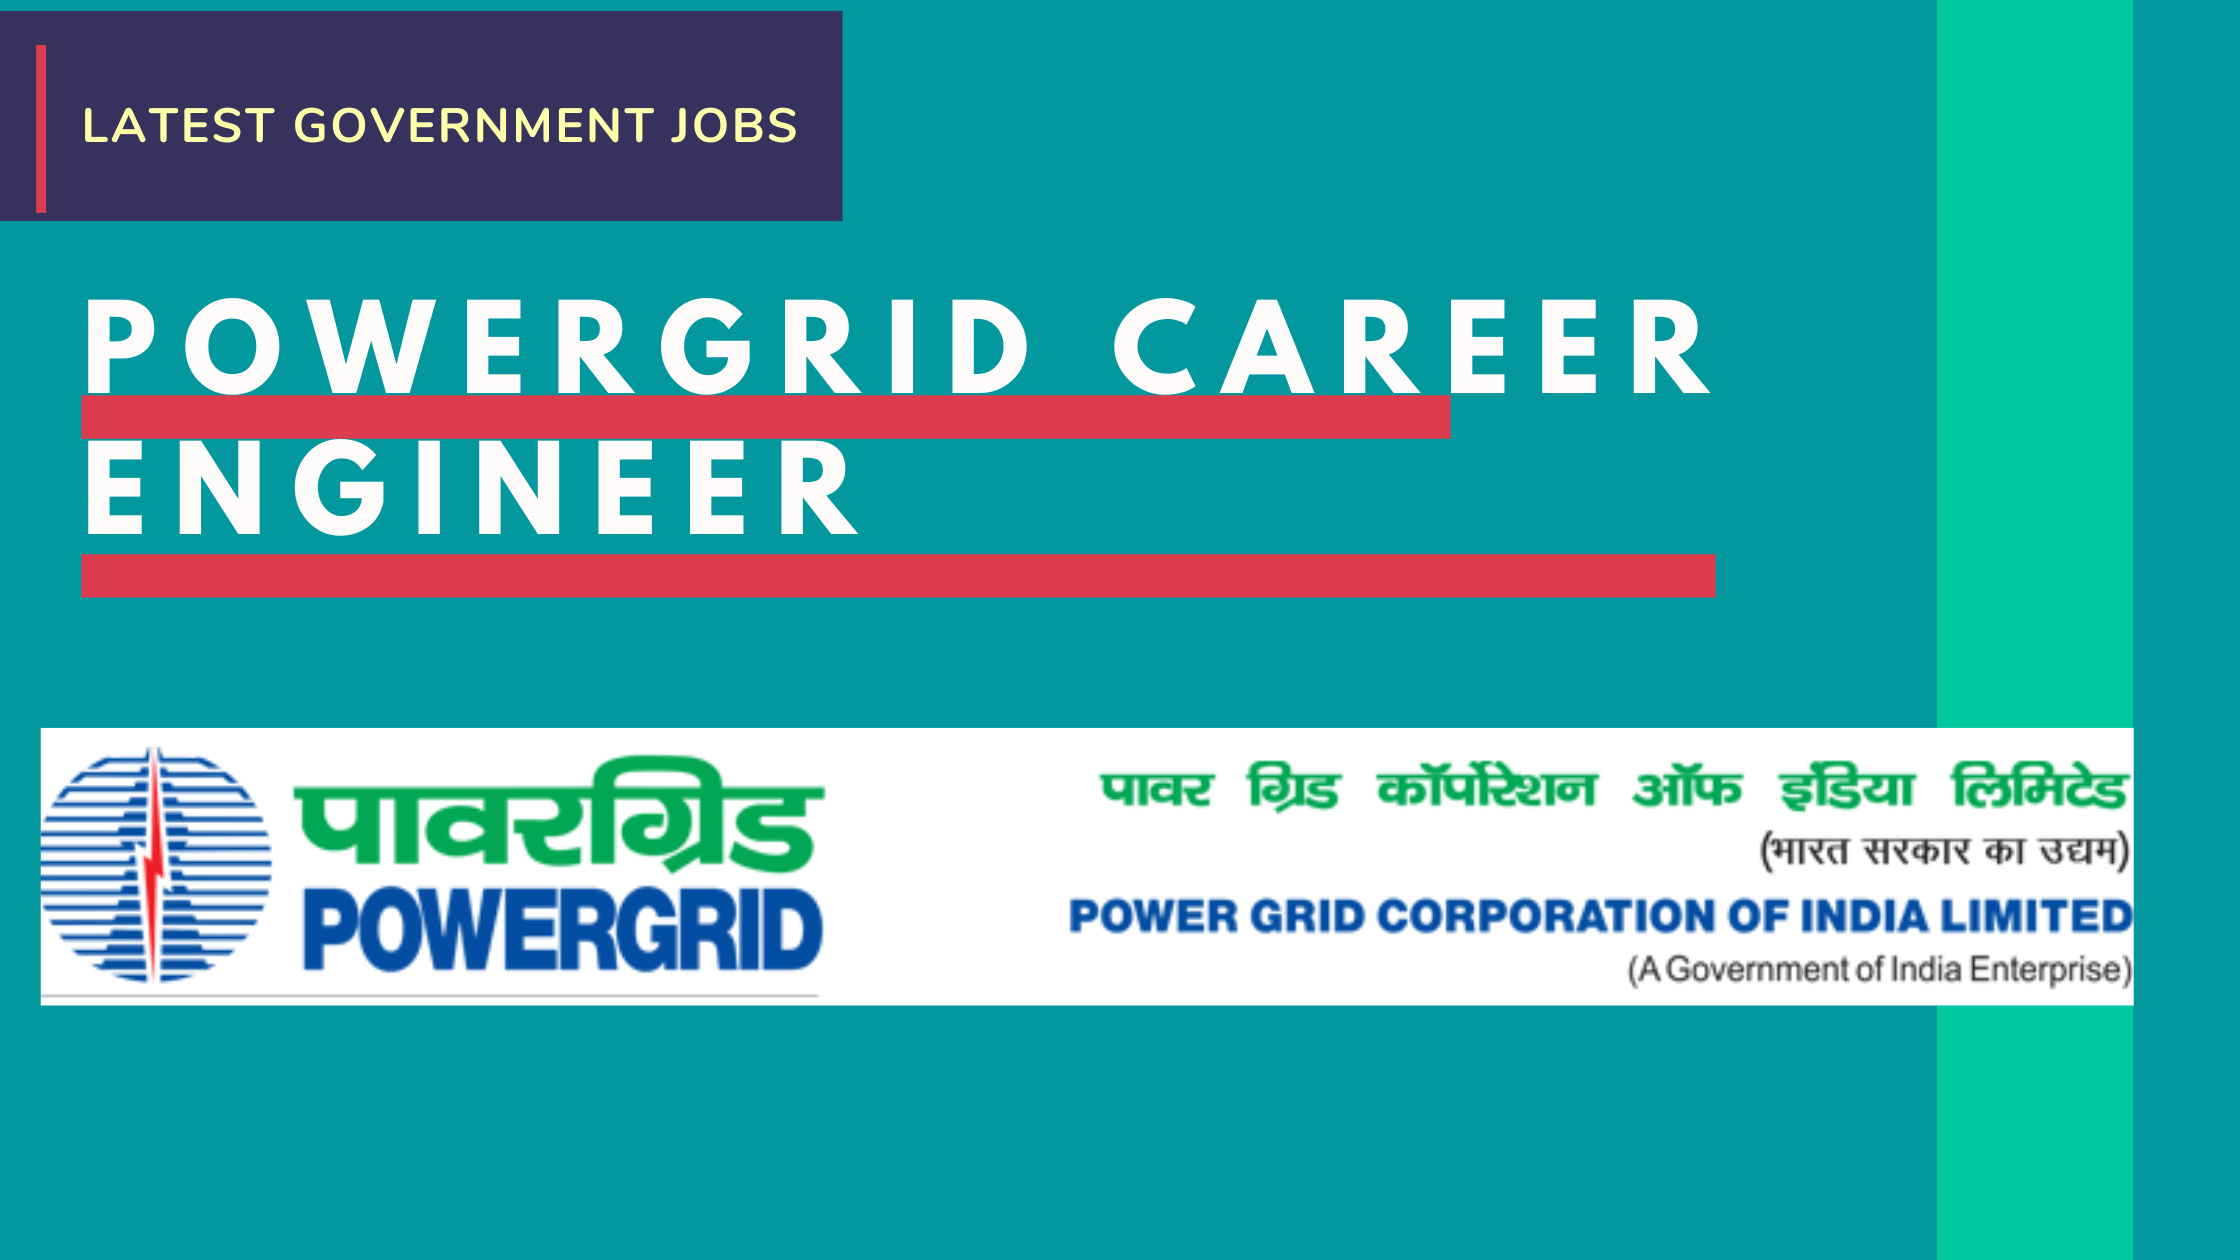 Powergrid Career opening for engineer post through Gate 2021